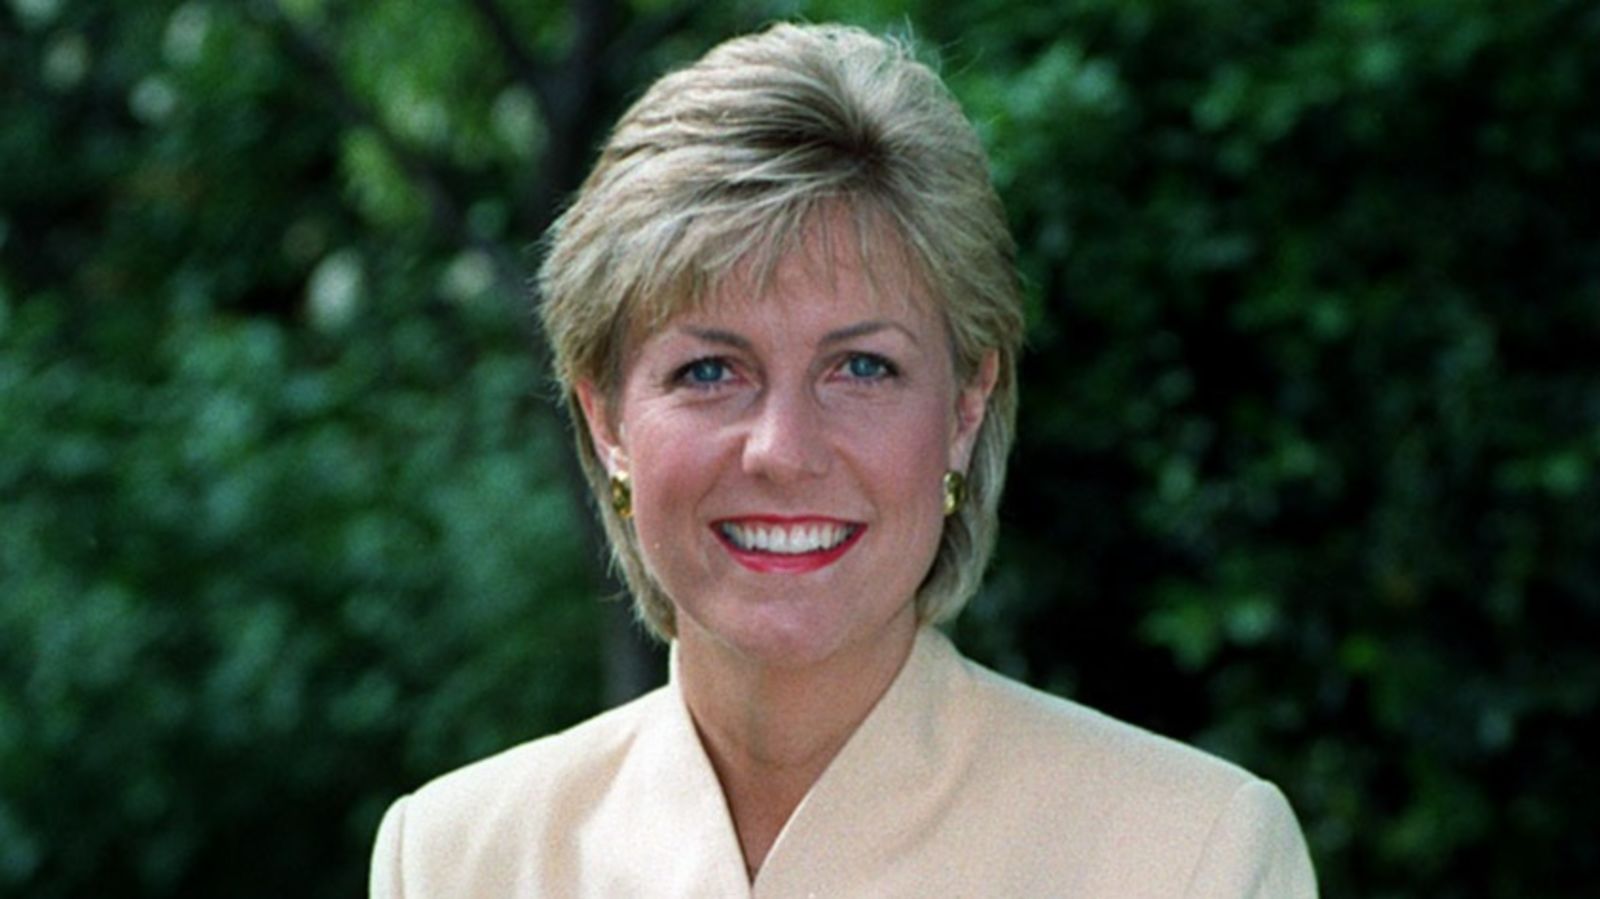 Jill Dando: Famous TV presenter's murder remains unsolved 25 years after her killing